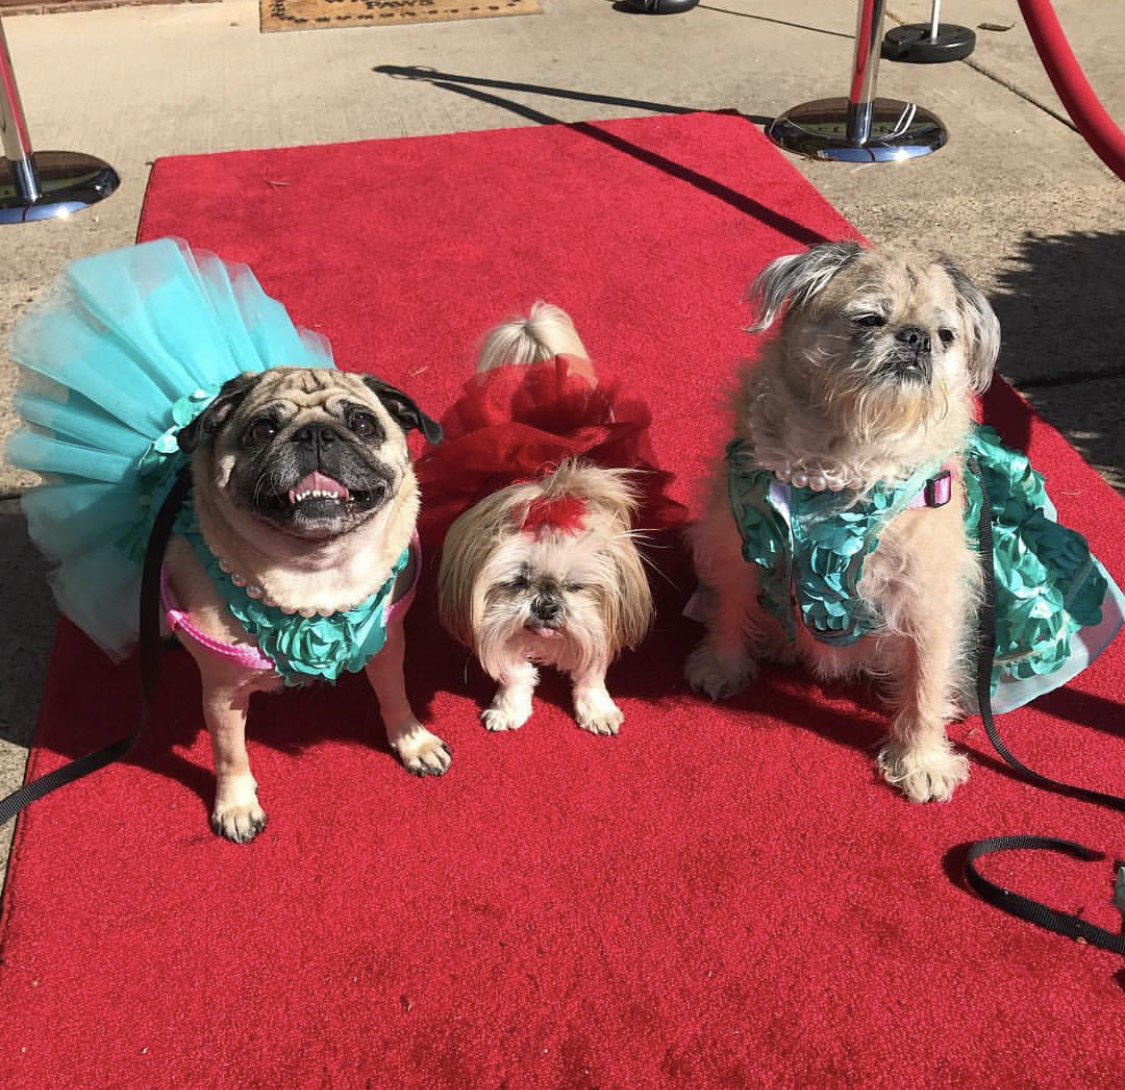 three Pugs wearing cute dresses while sitting in the red carpet